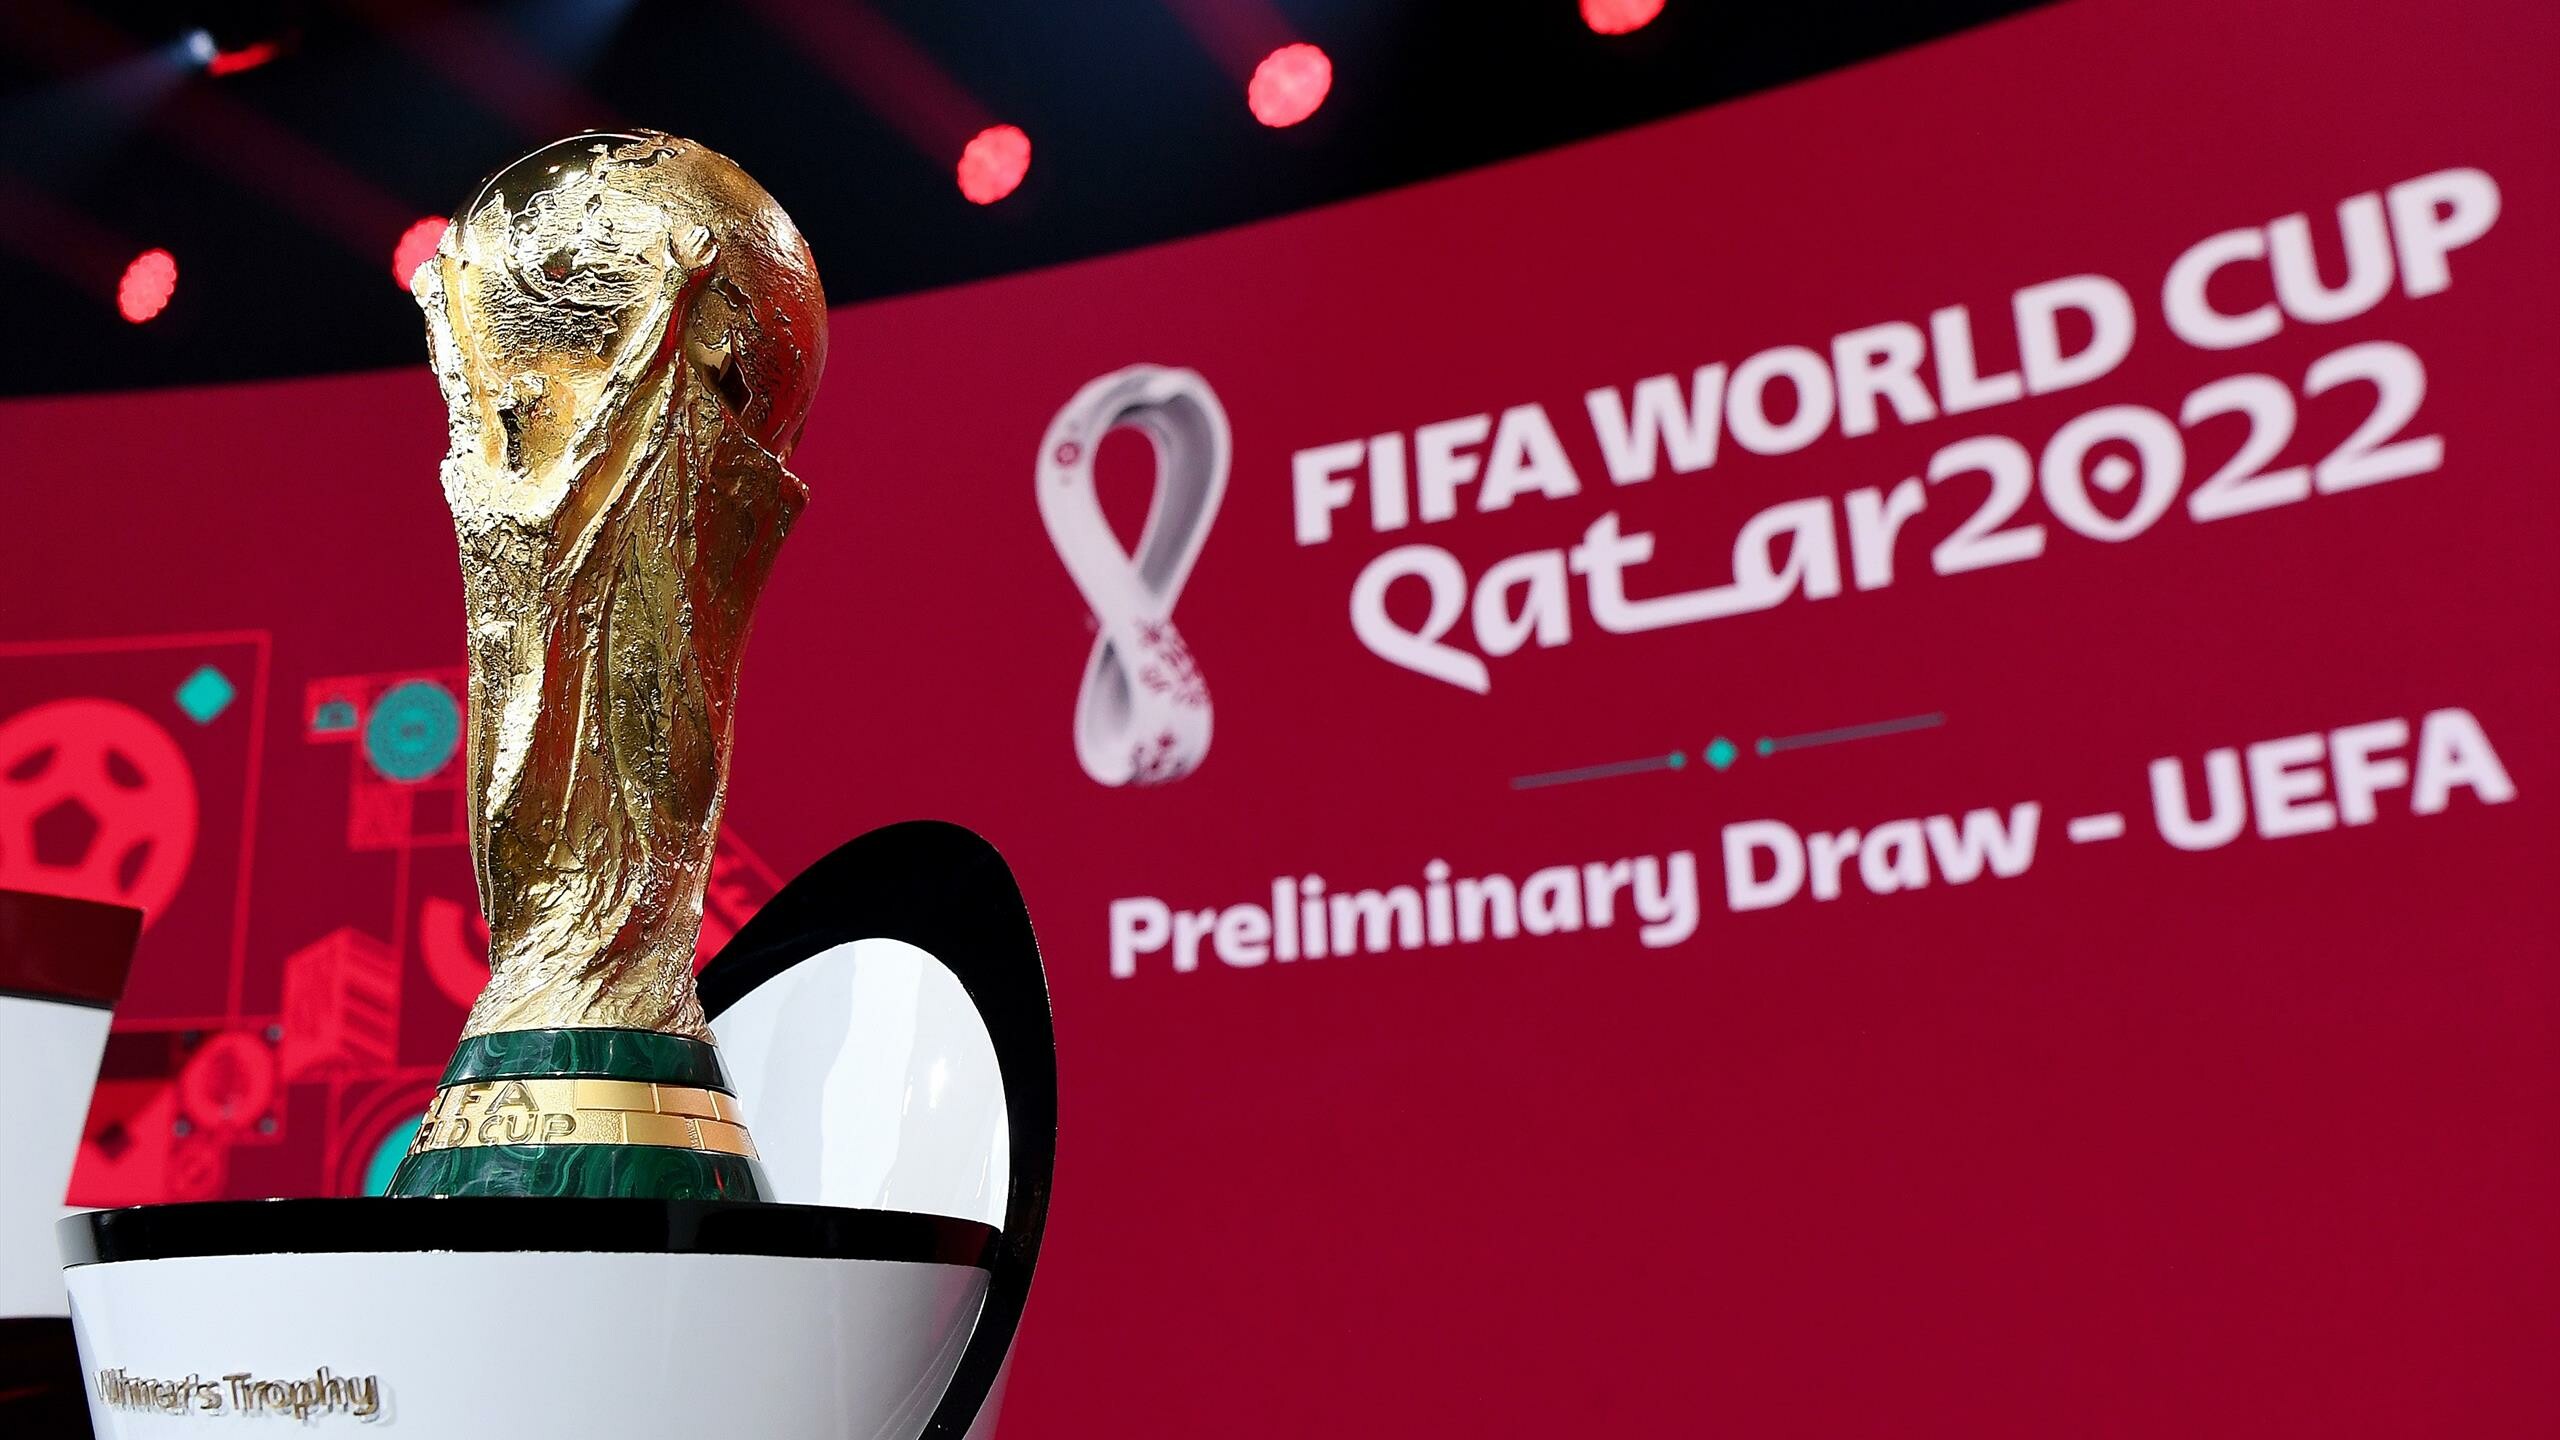 2022 FIFA World Cup, Exciting draw, England's rivals, Wales faces Belgium, 2560x1440 HD Desktop